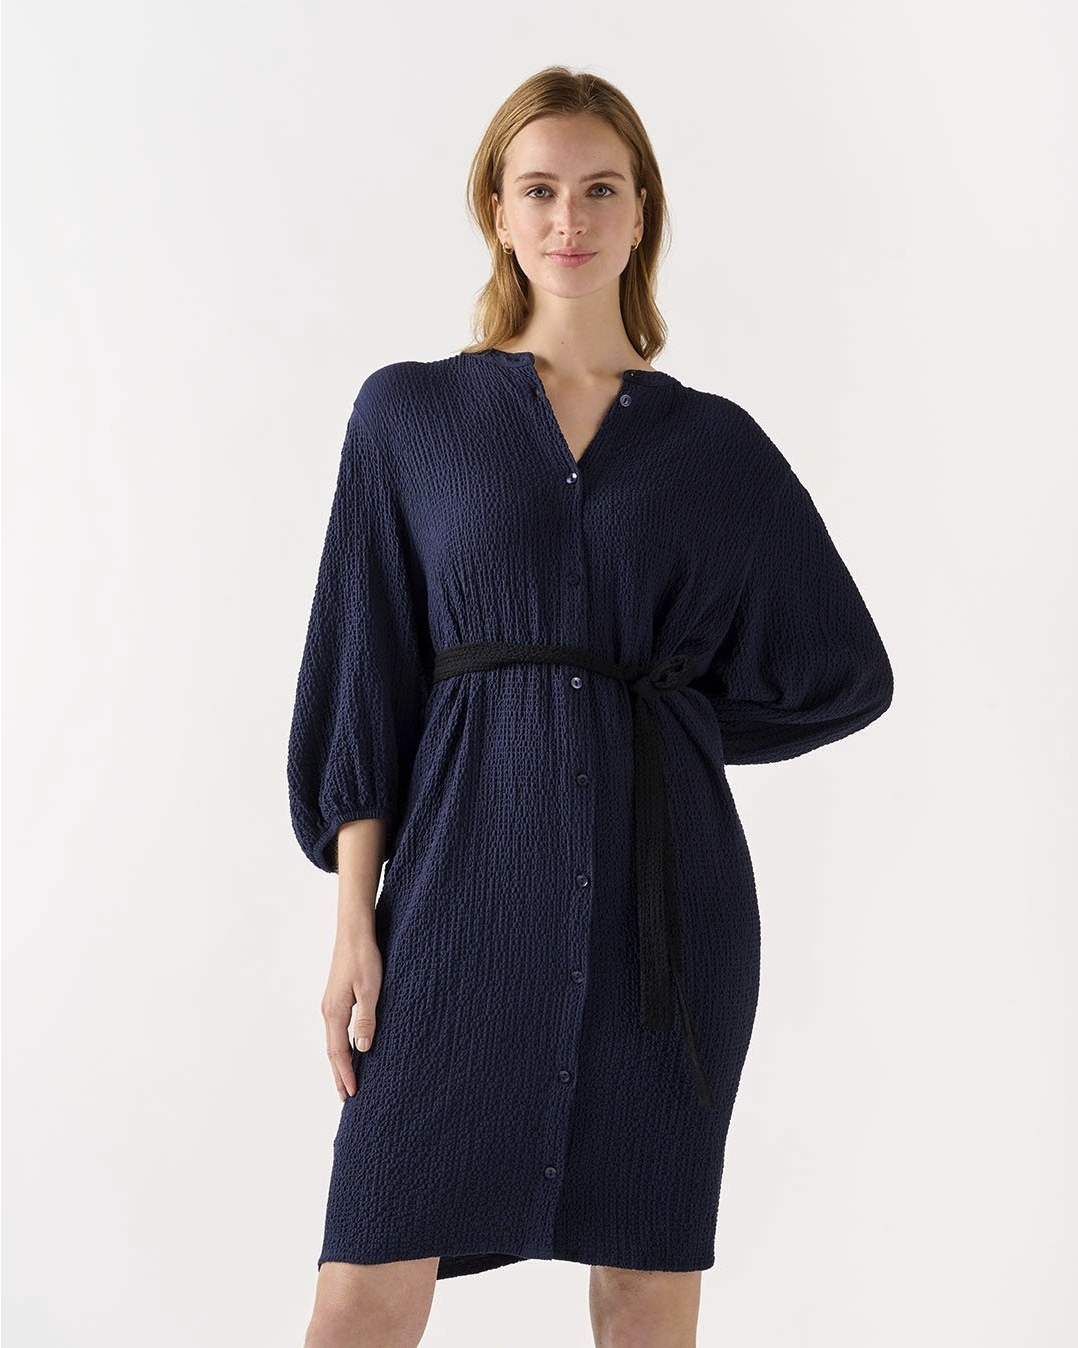 Another-Label Another-Label, Amani Dress, night sky, M